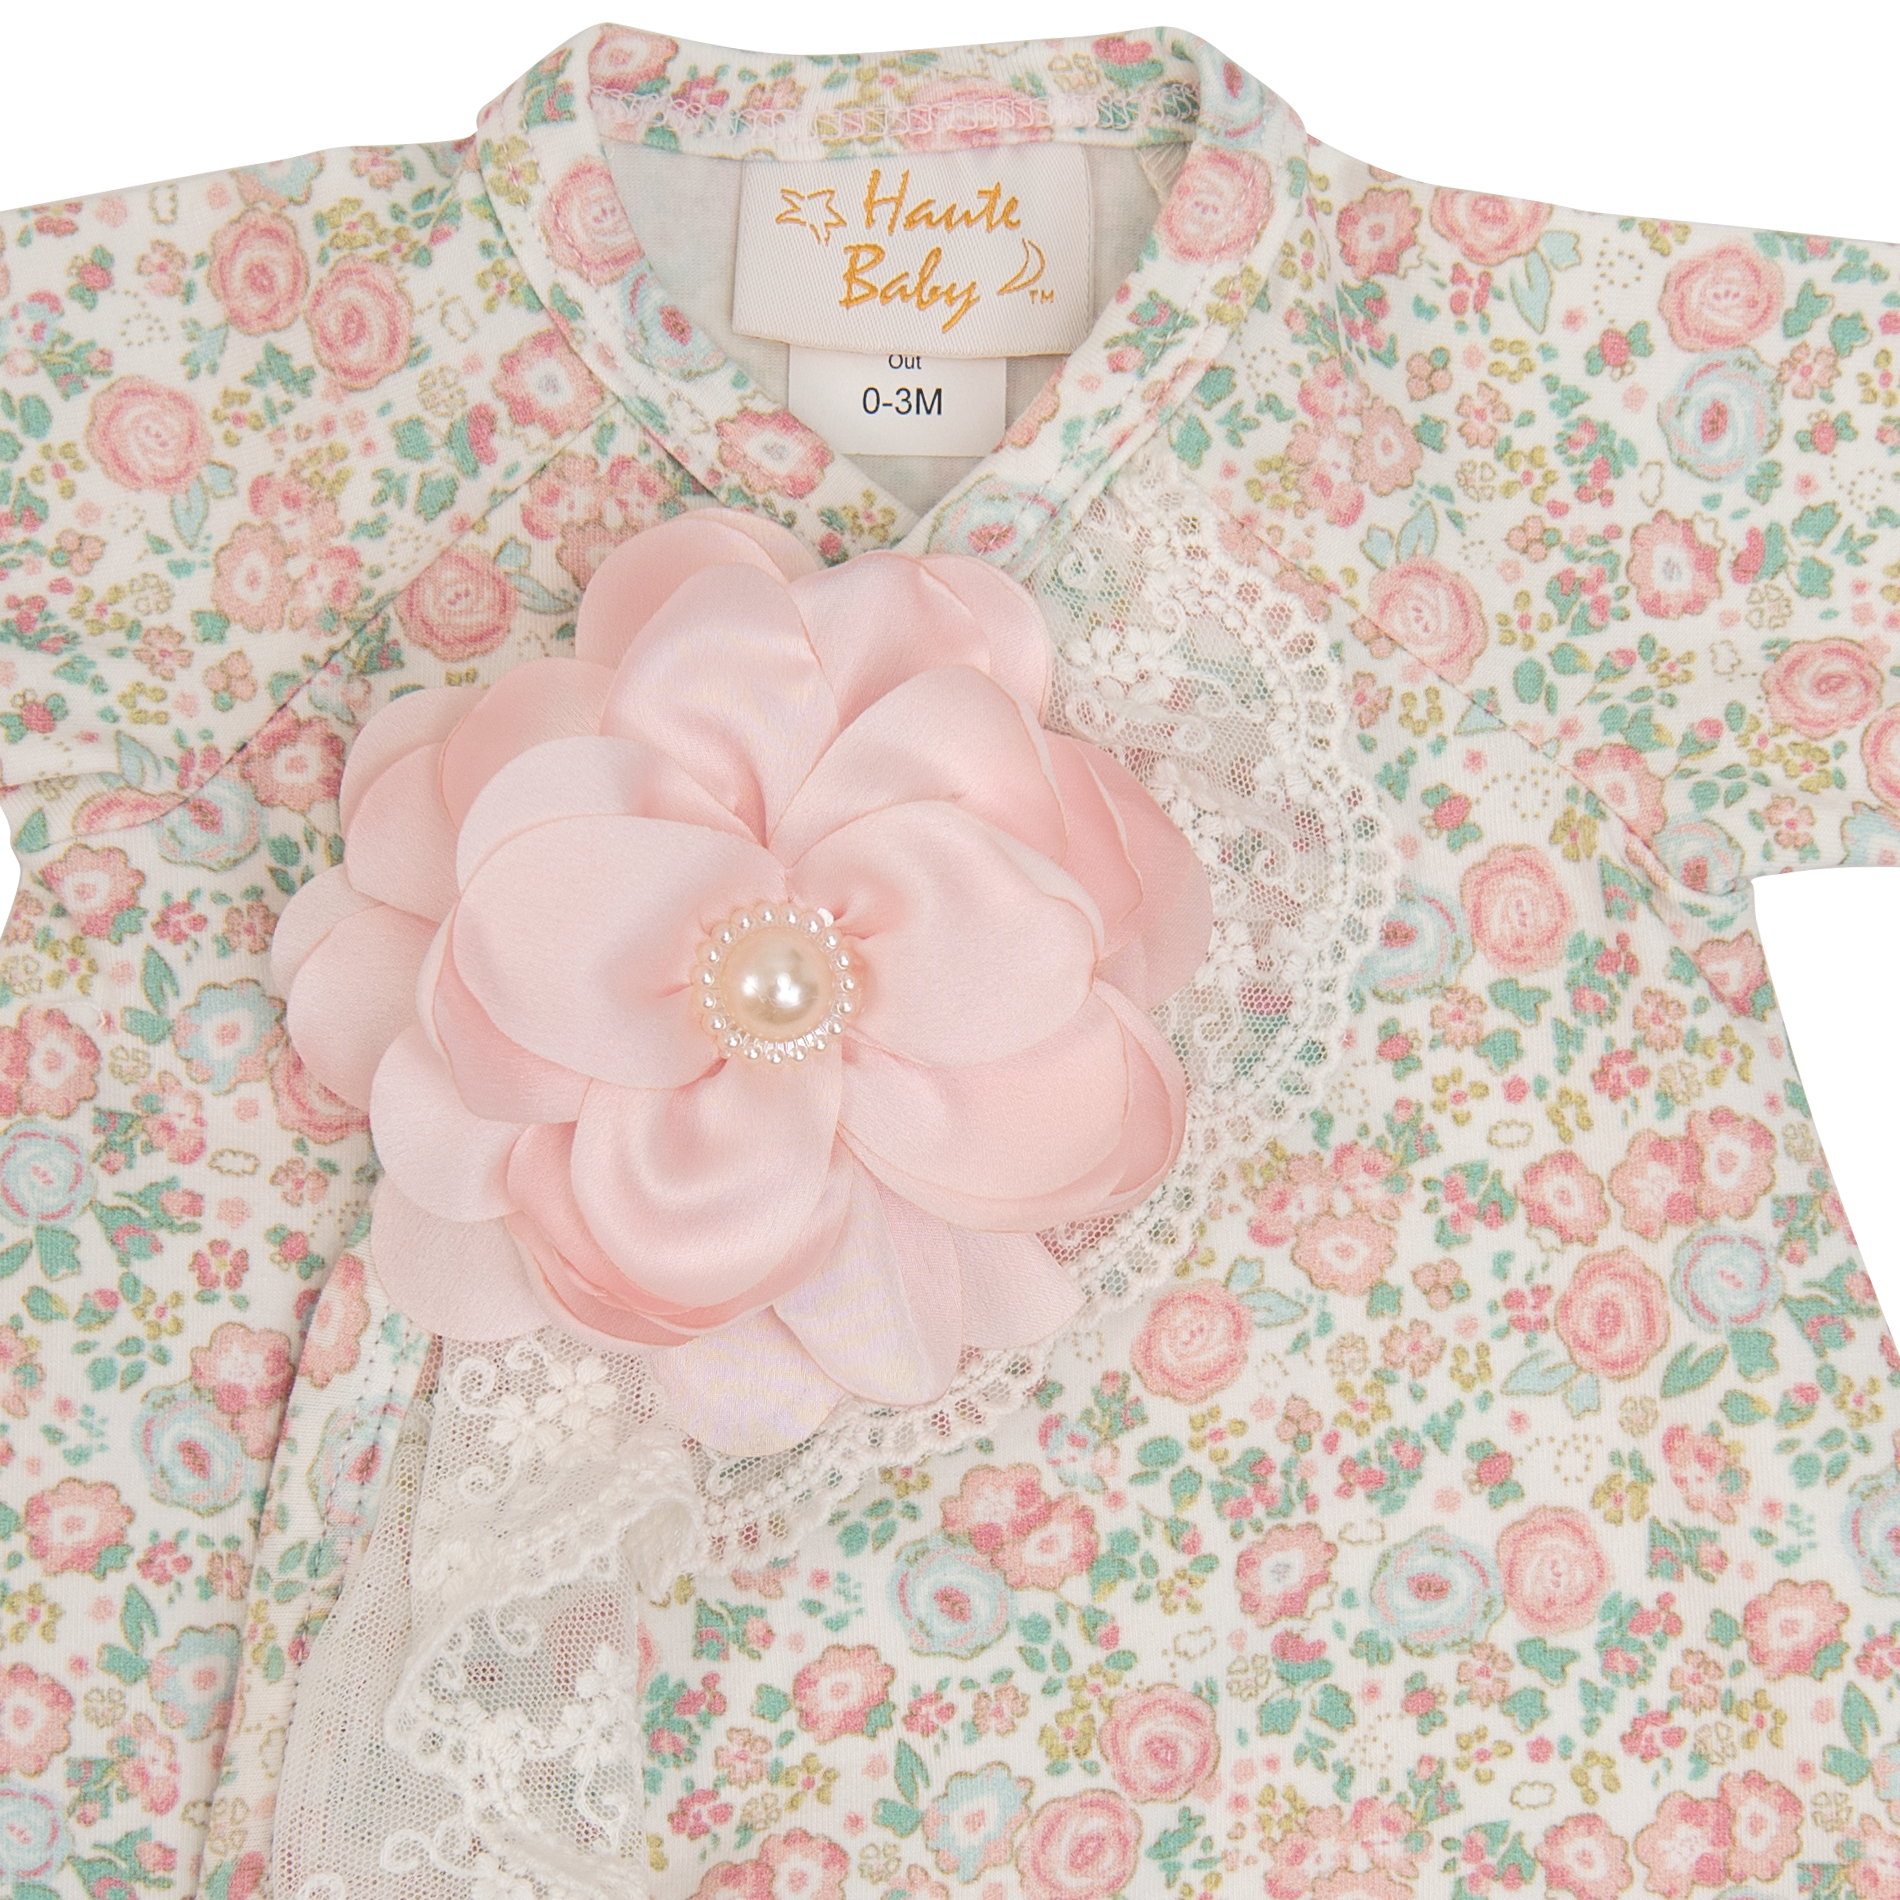 Gabrielle's Garden Baby Gown - Milly's Boutique